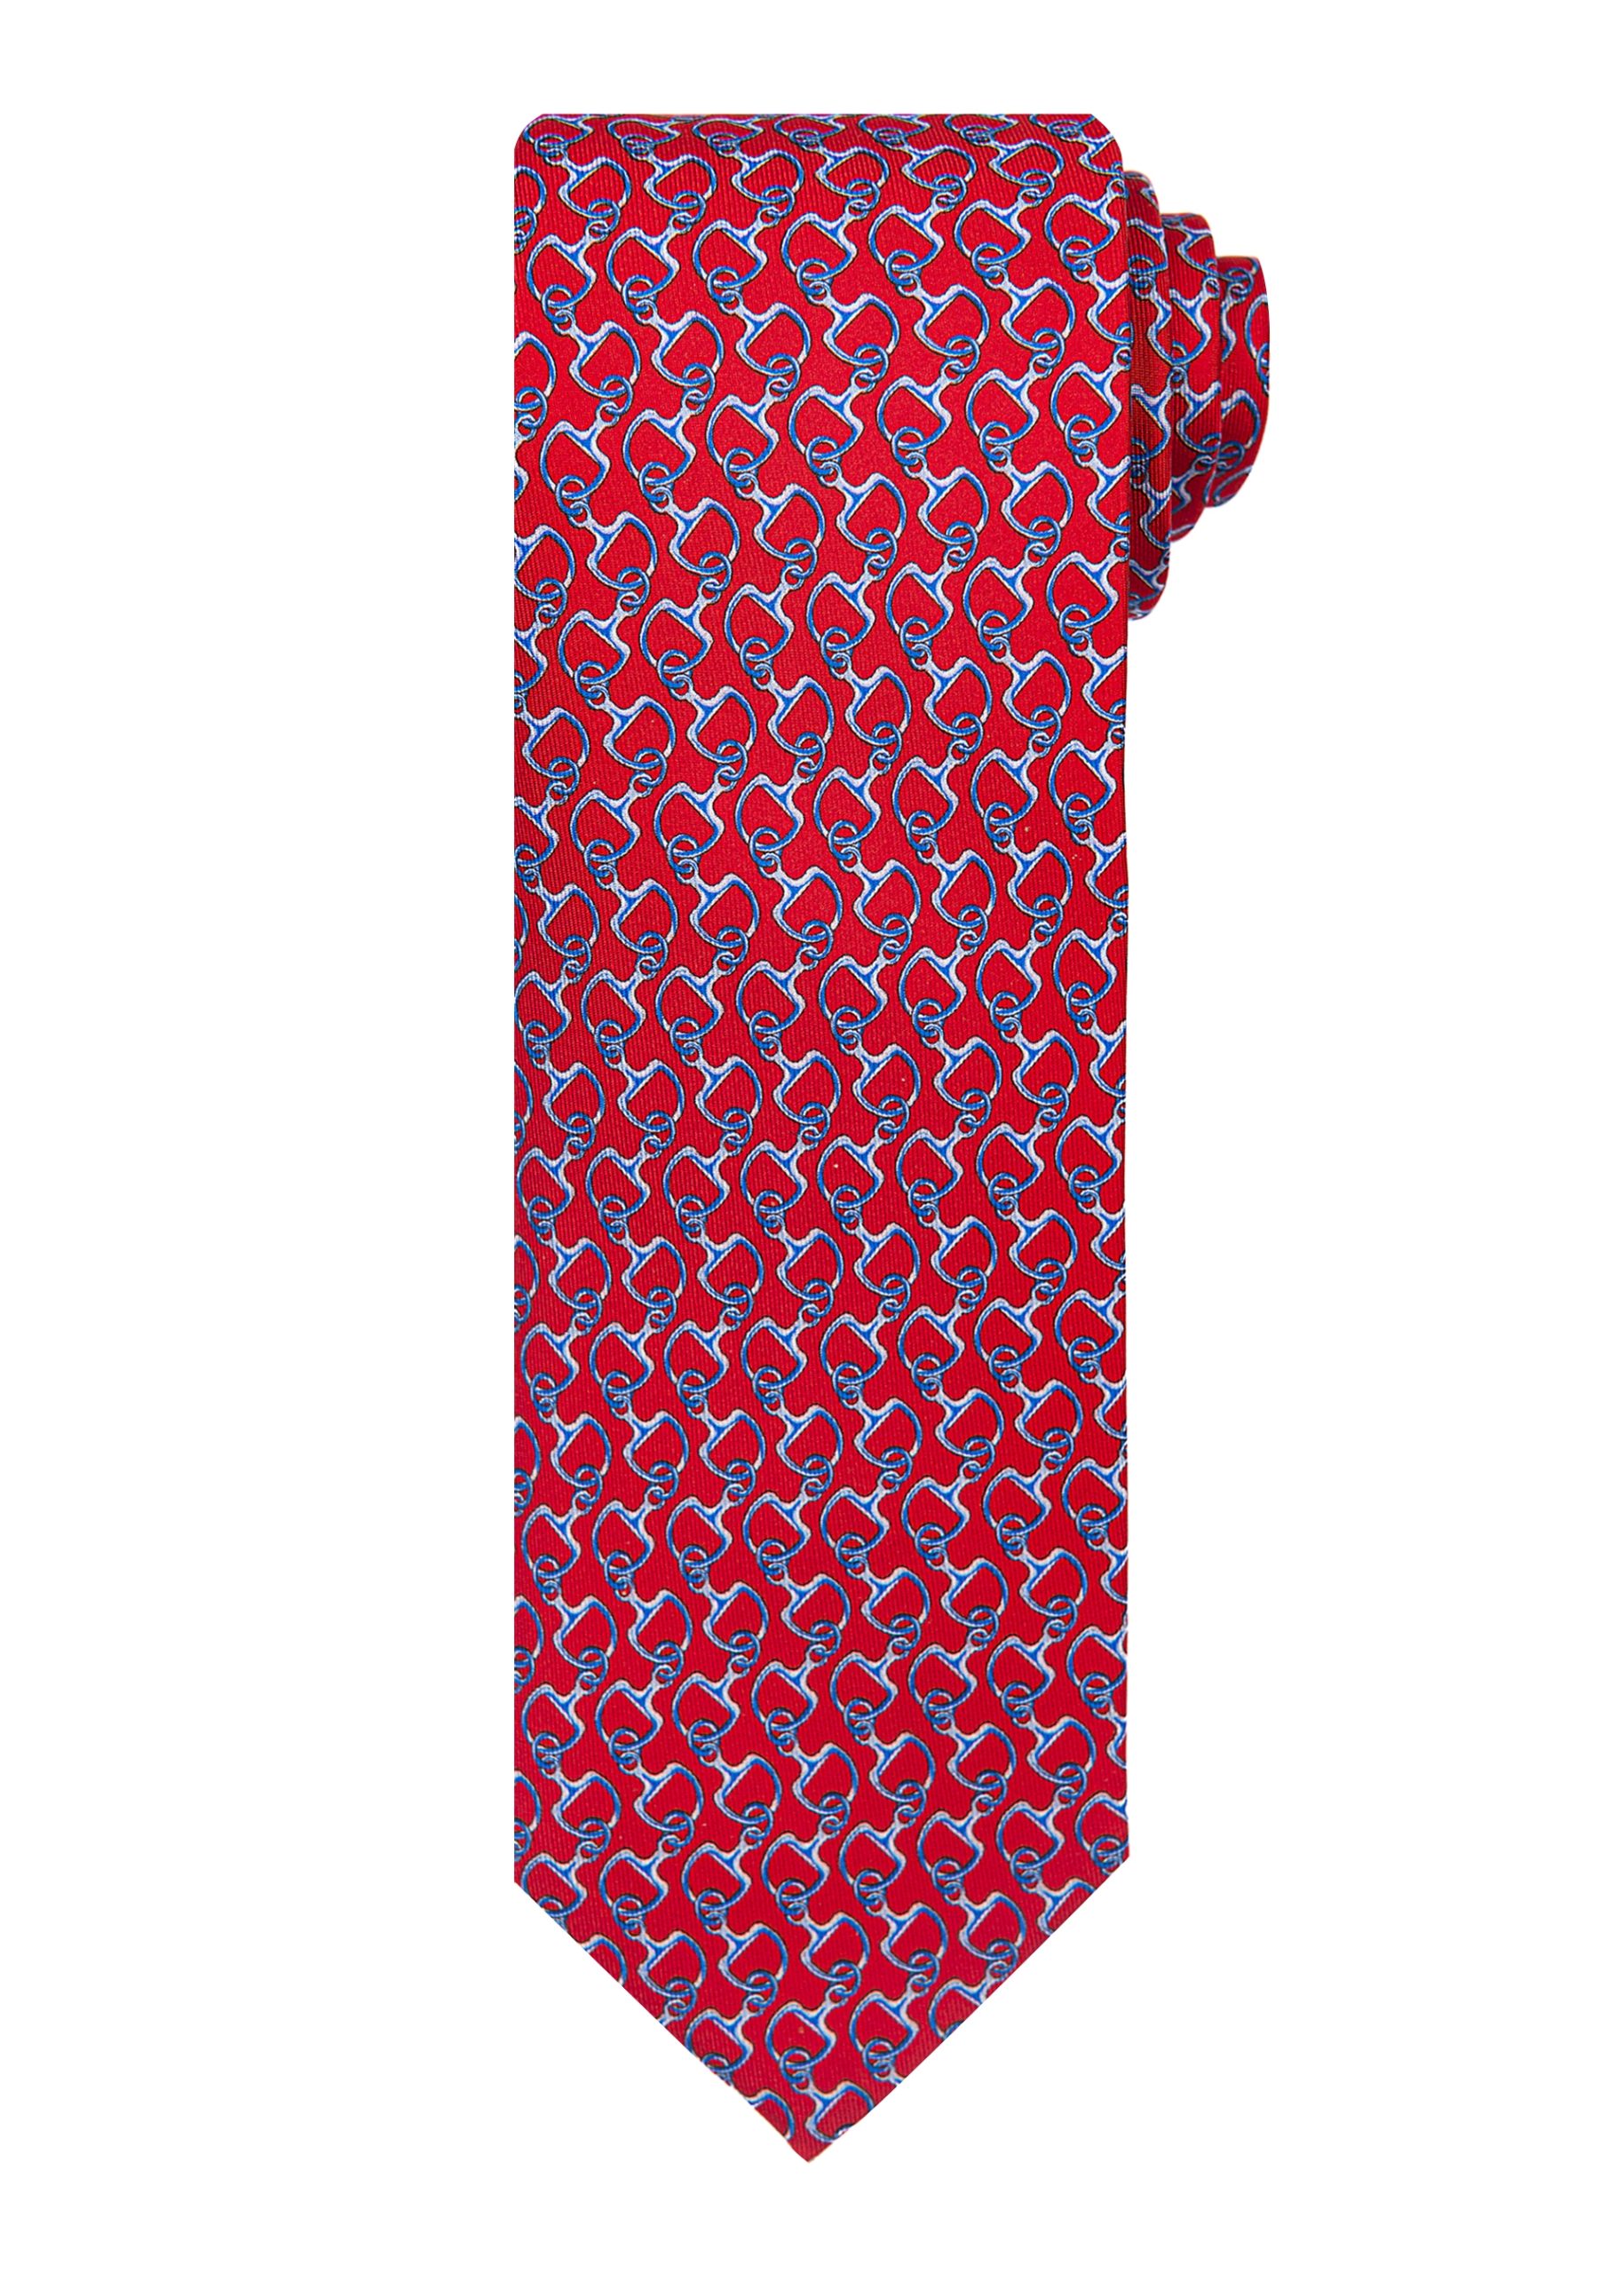 Roderick Charles red and blue patterned tie with snaffles